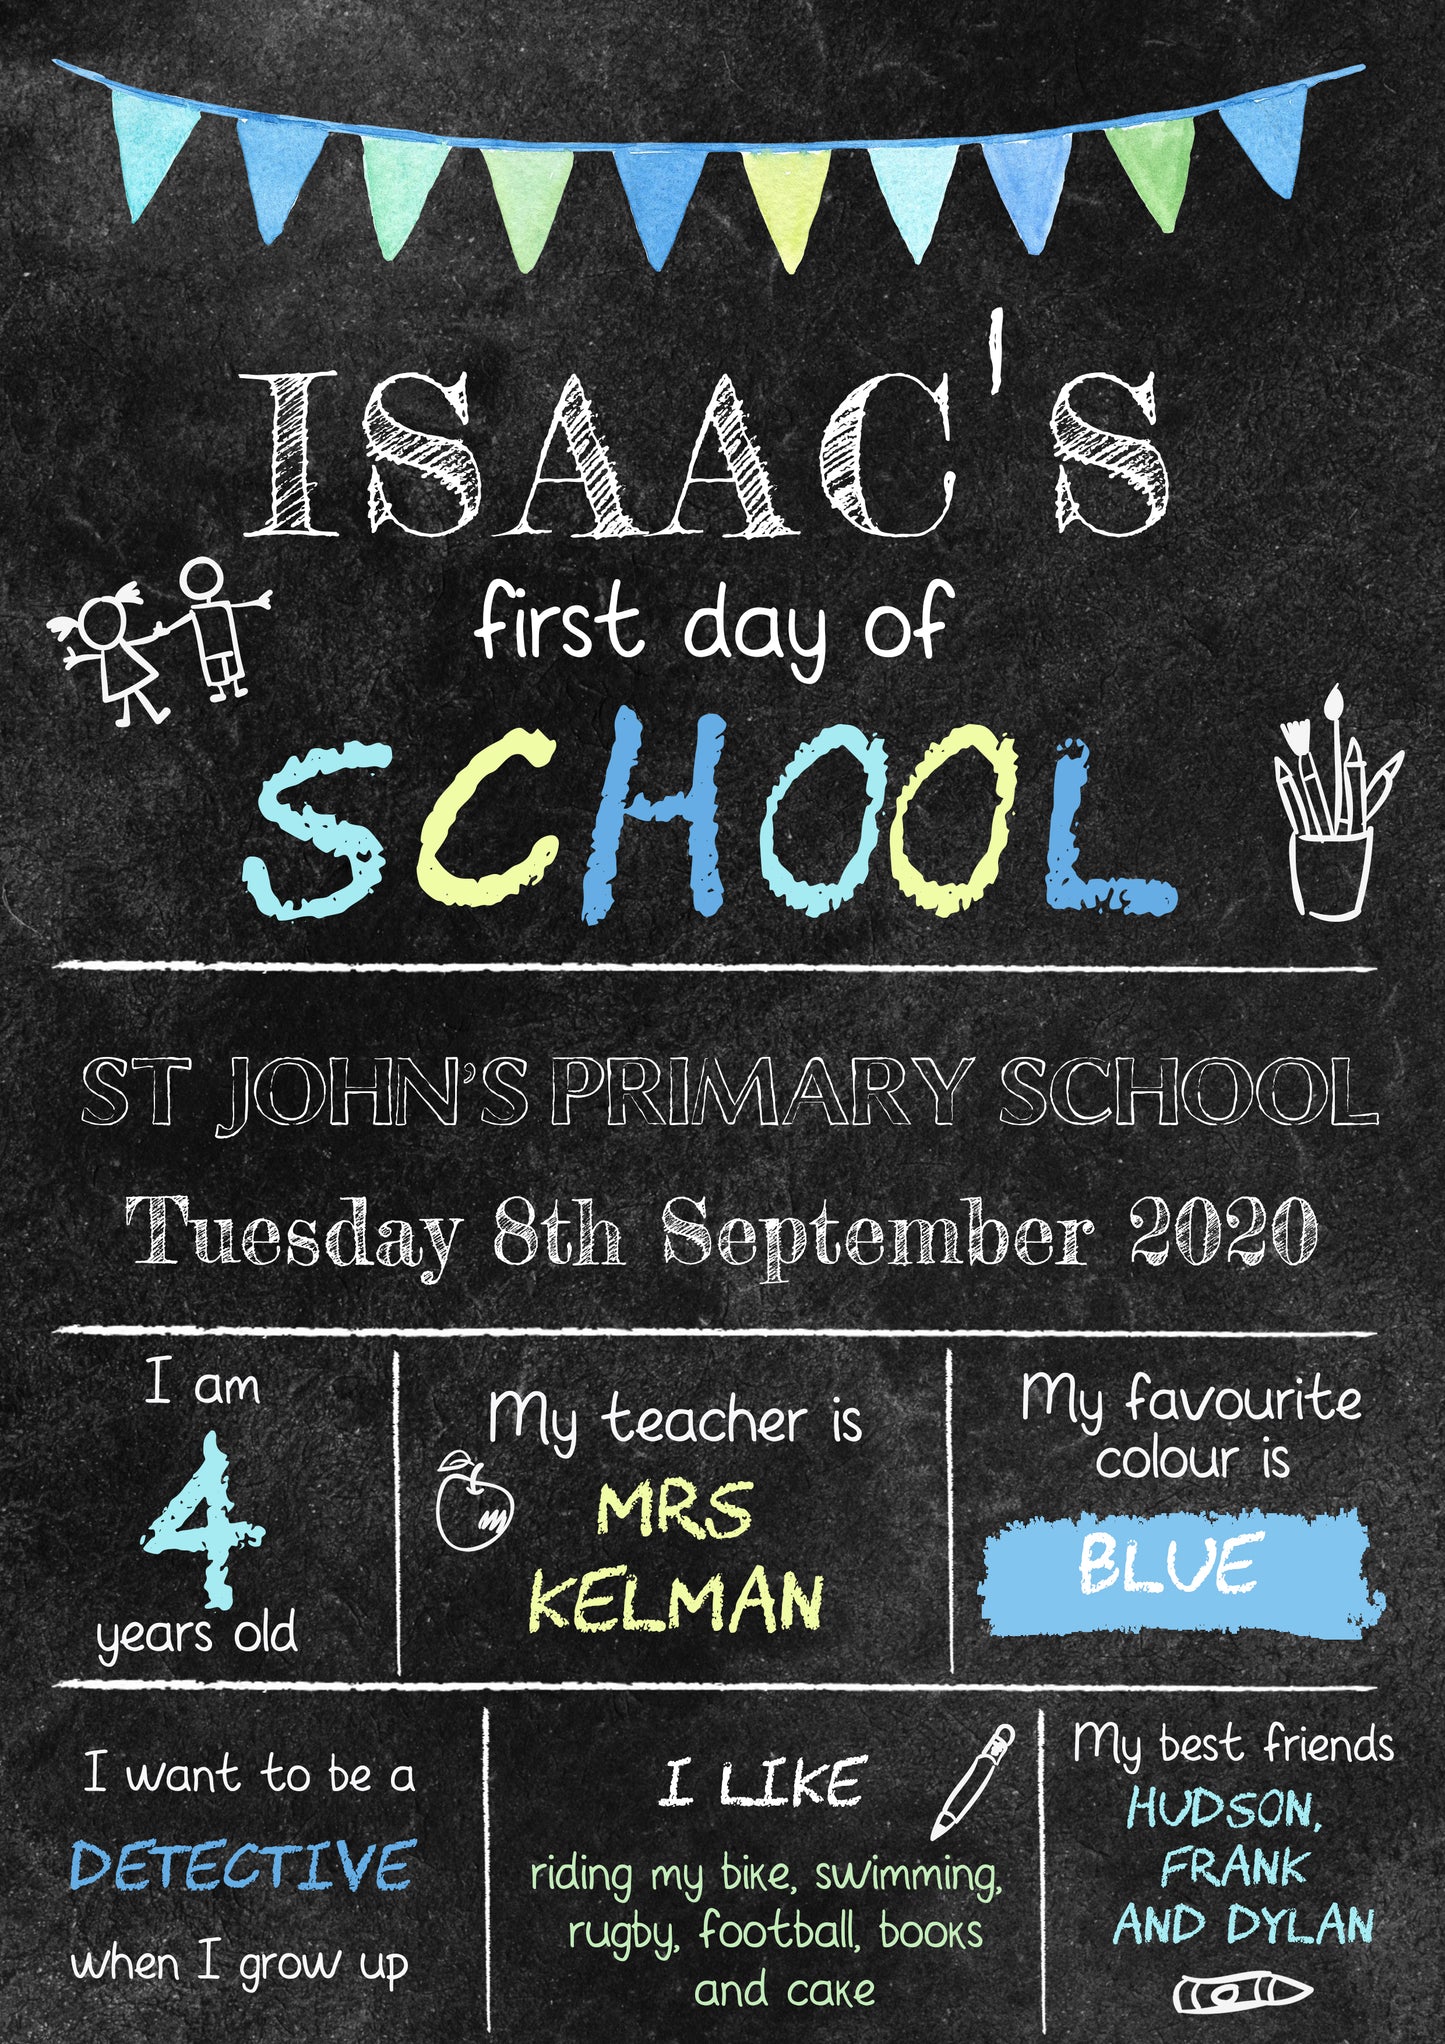 Personalised 'First Day' print